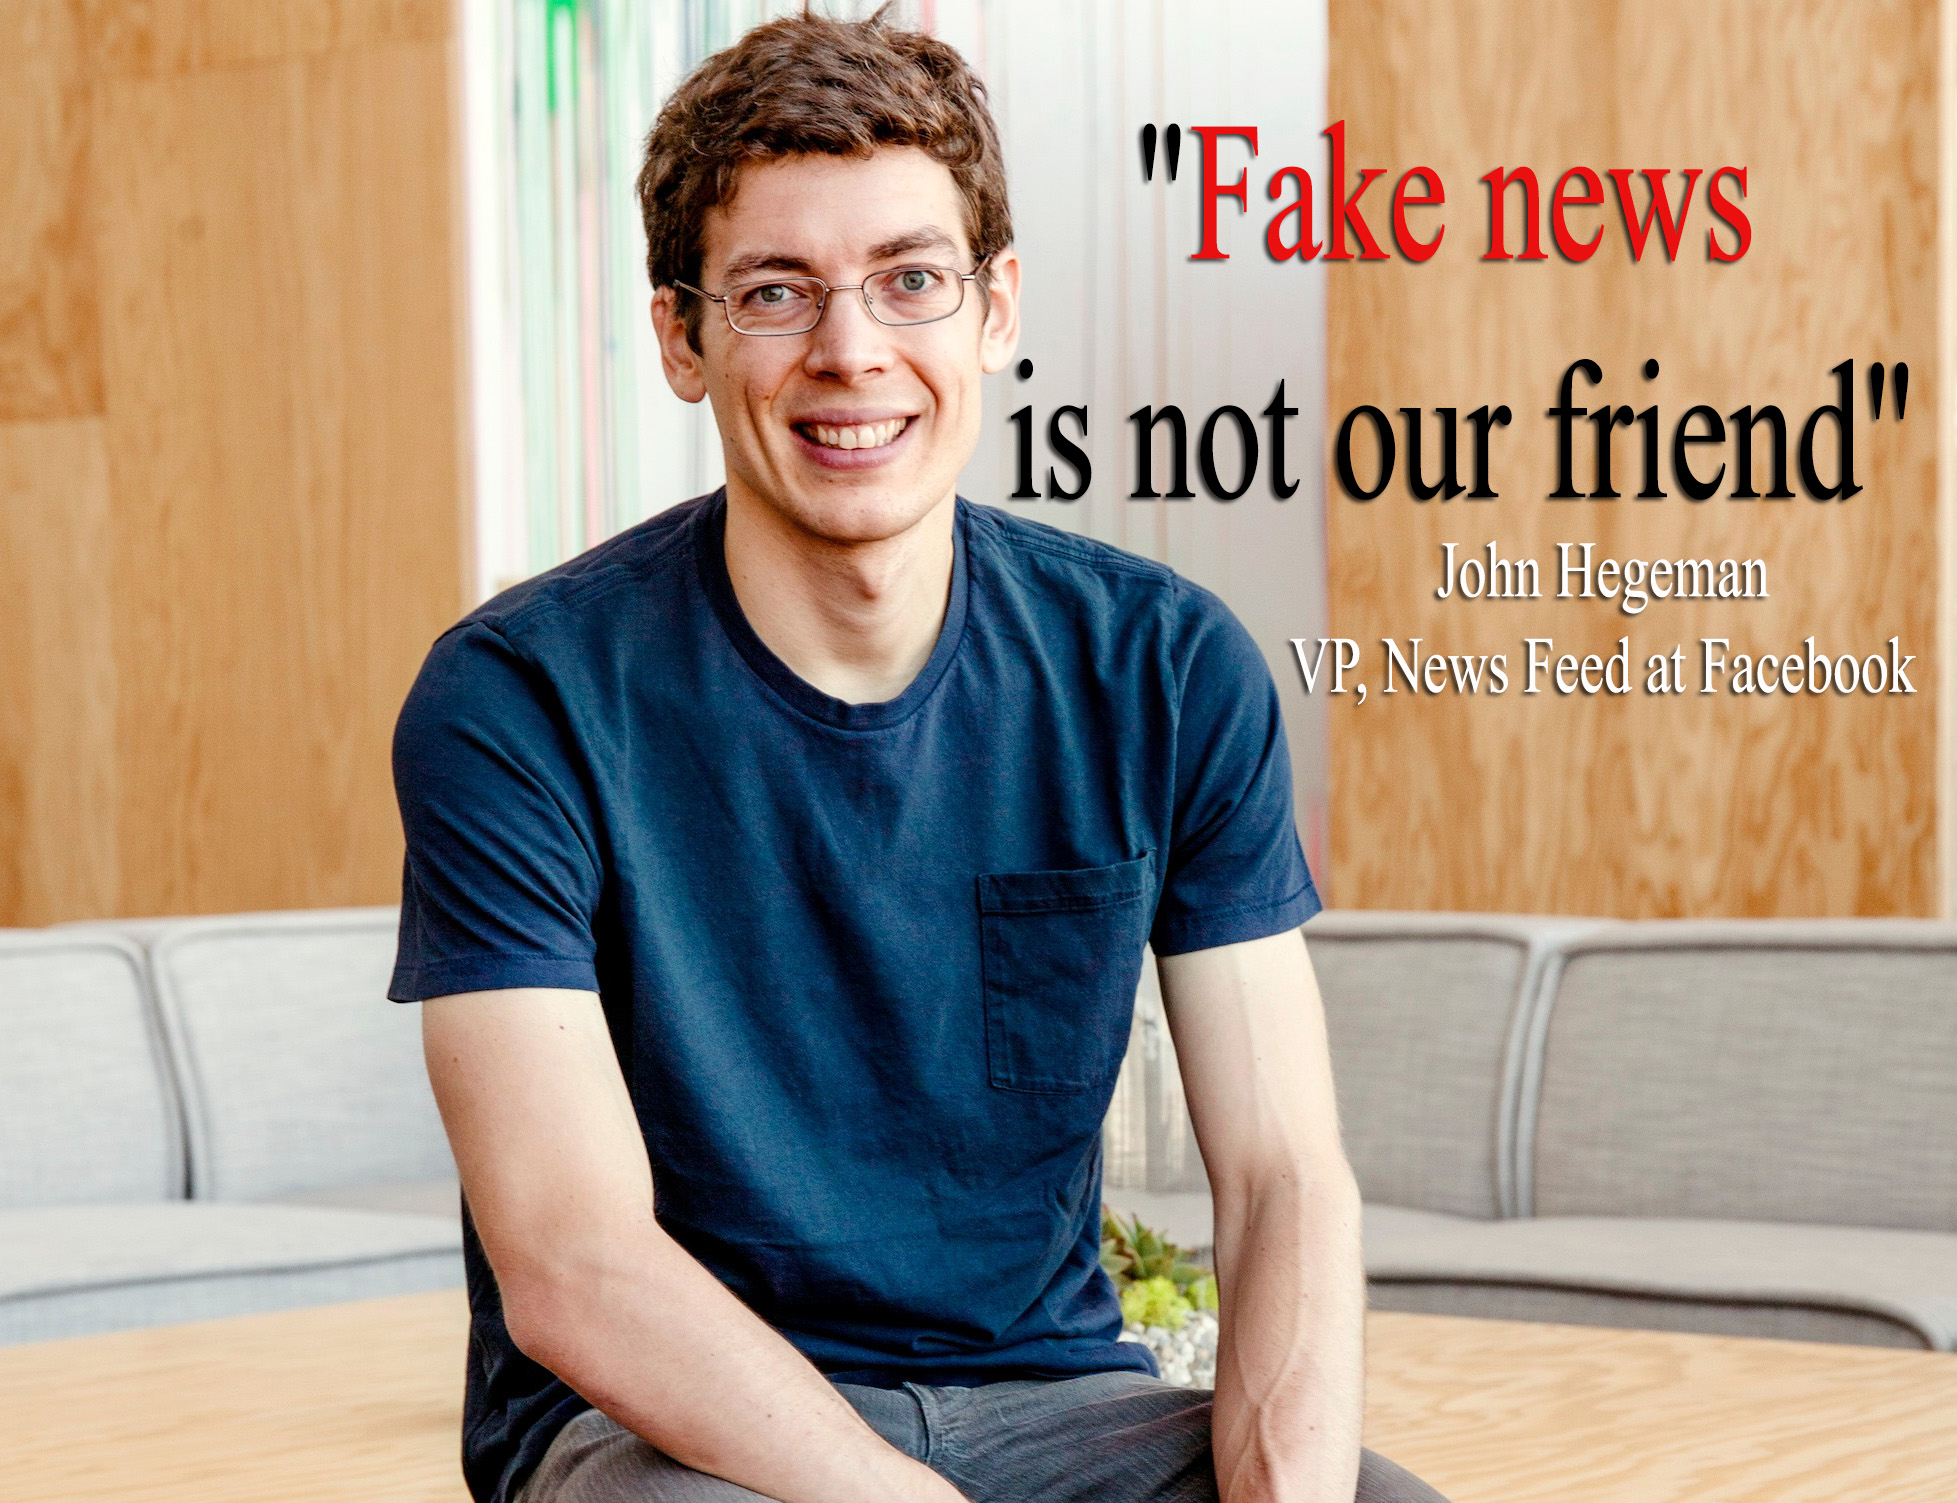 “Fake news is not our friend” Facebook